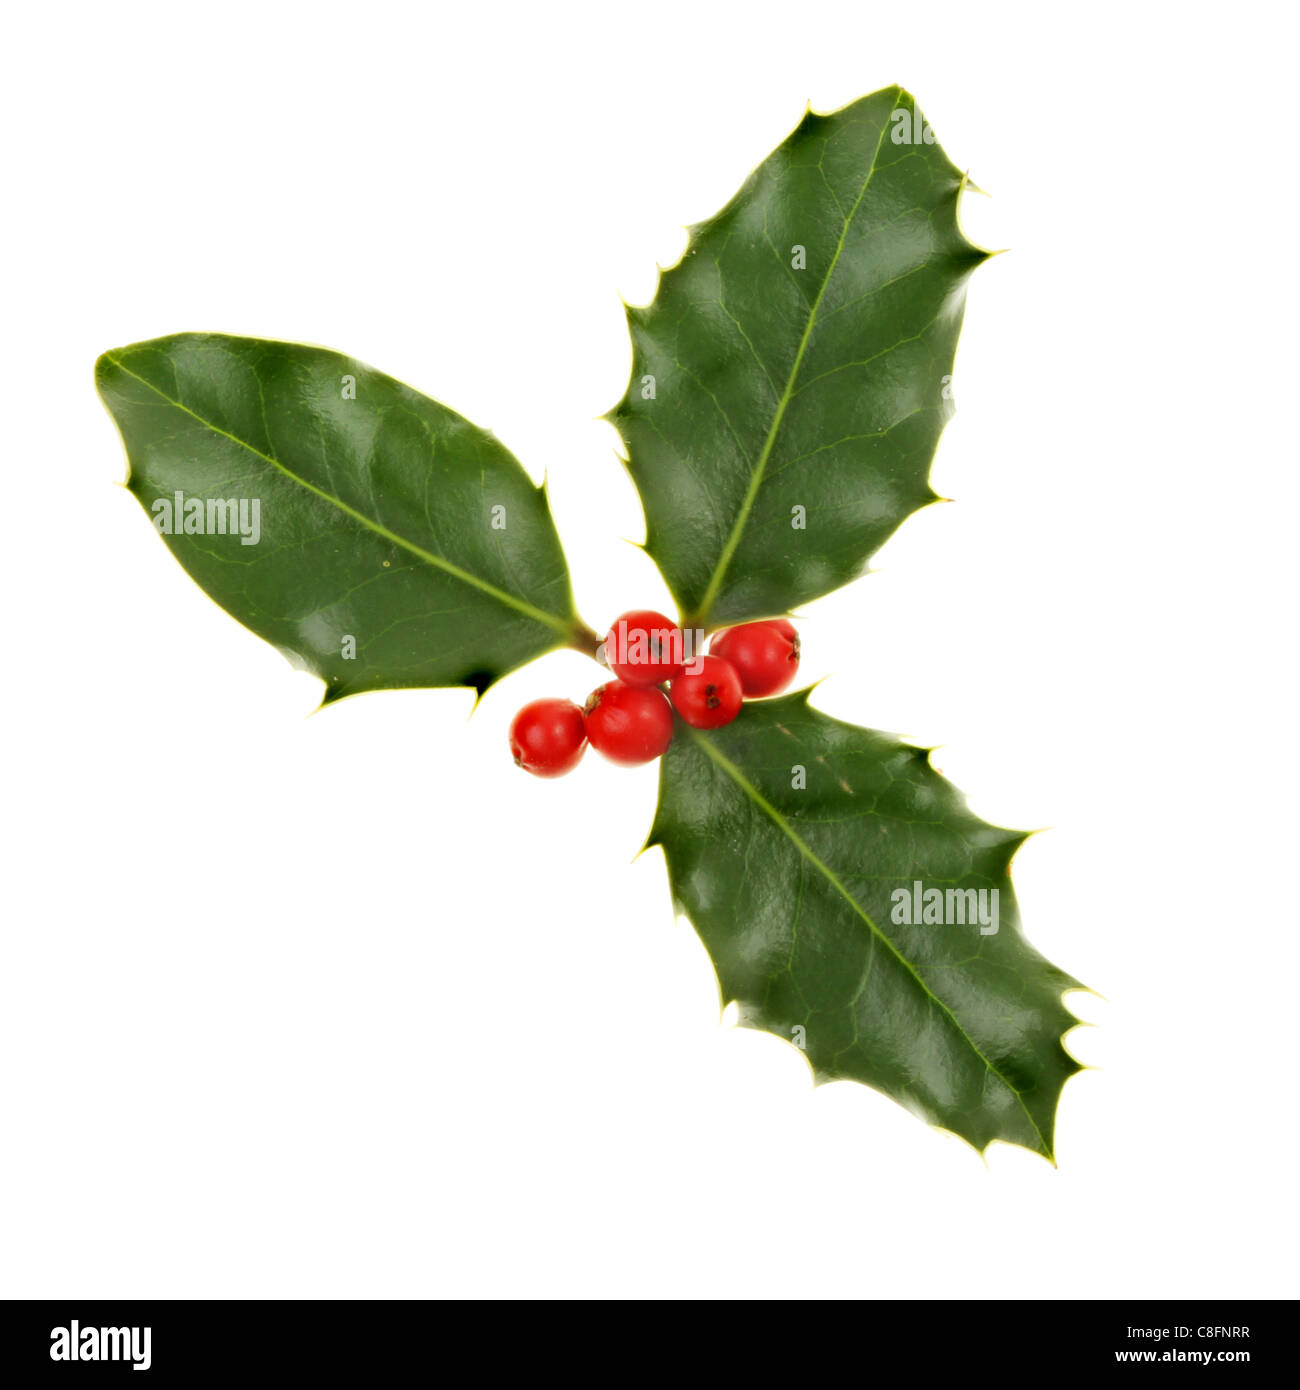 Sprig of holly with ripe red berries isolated against white Stock Photo